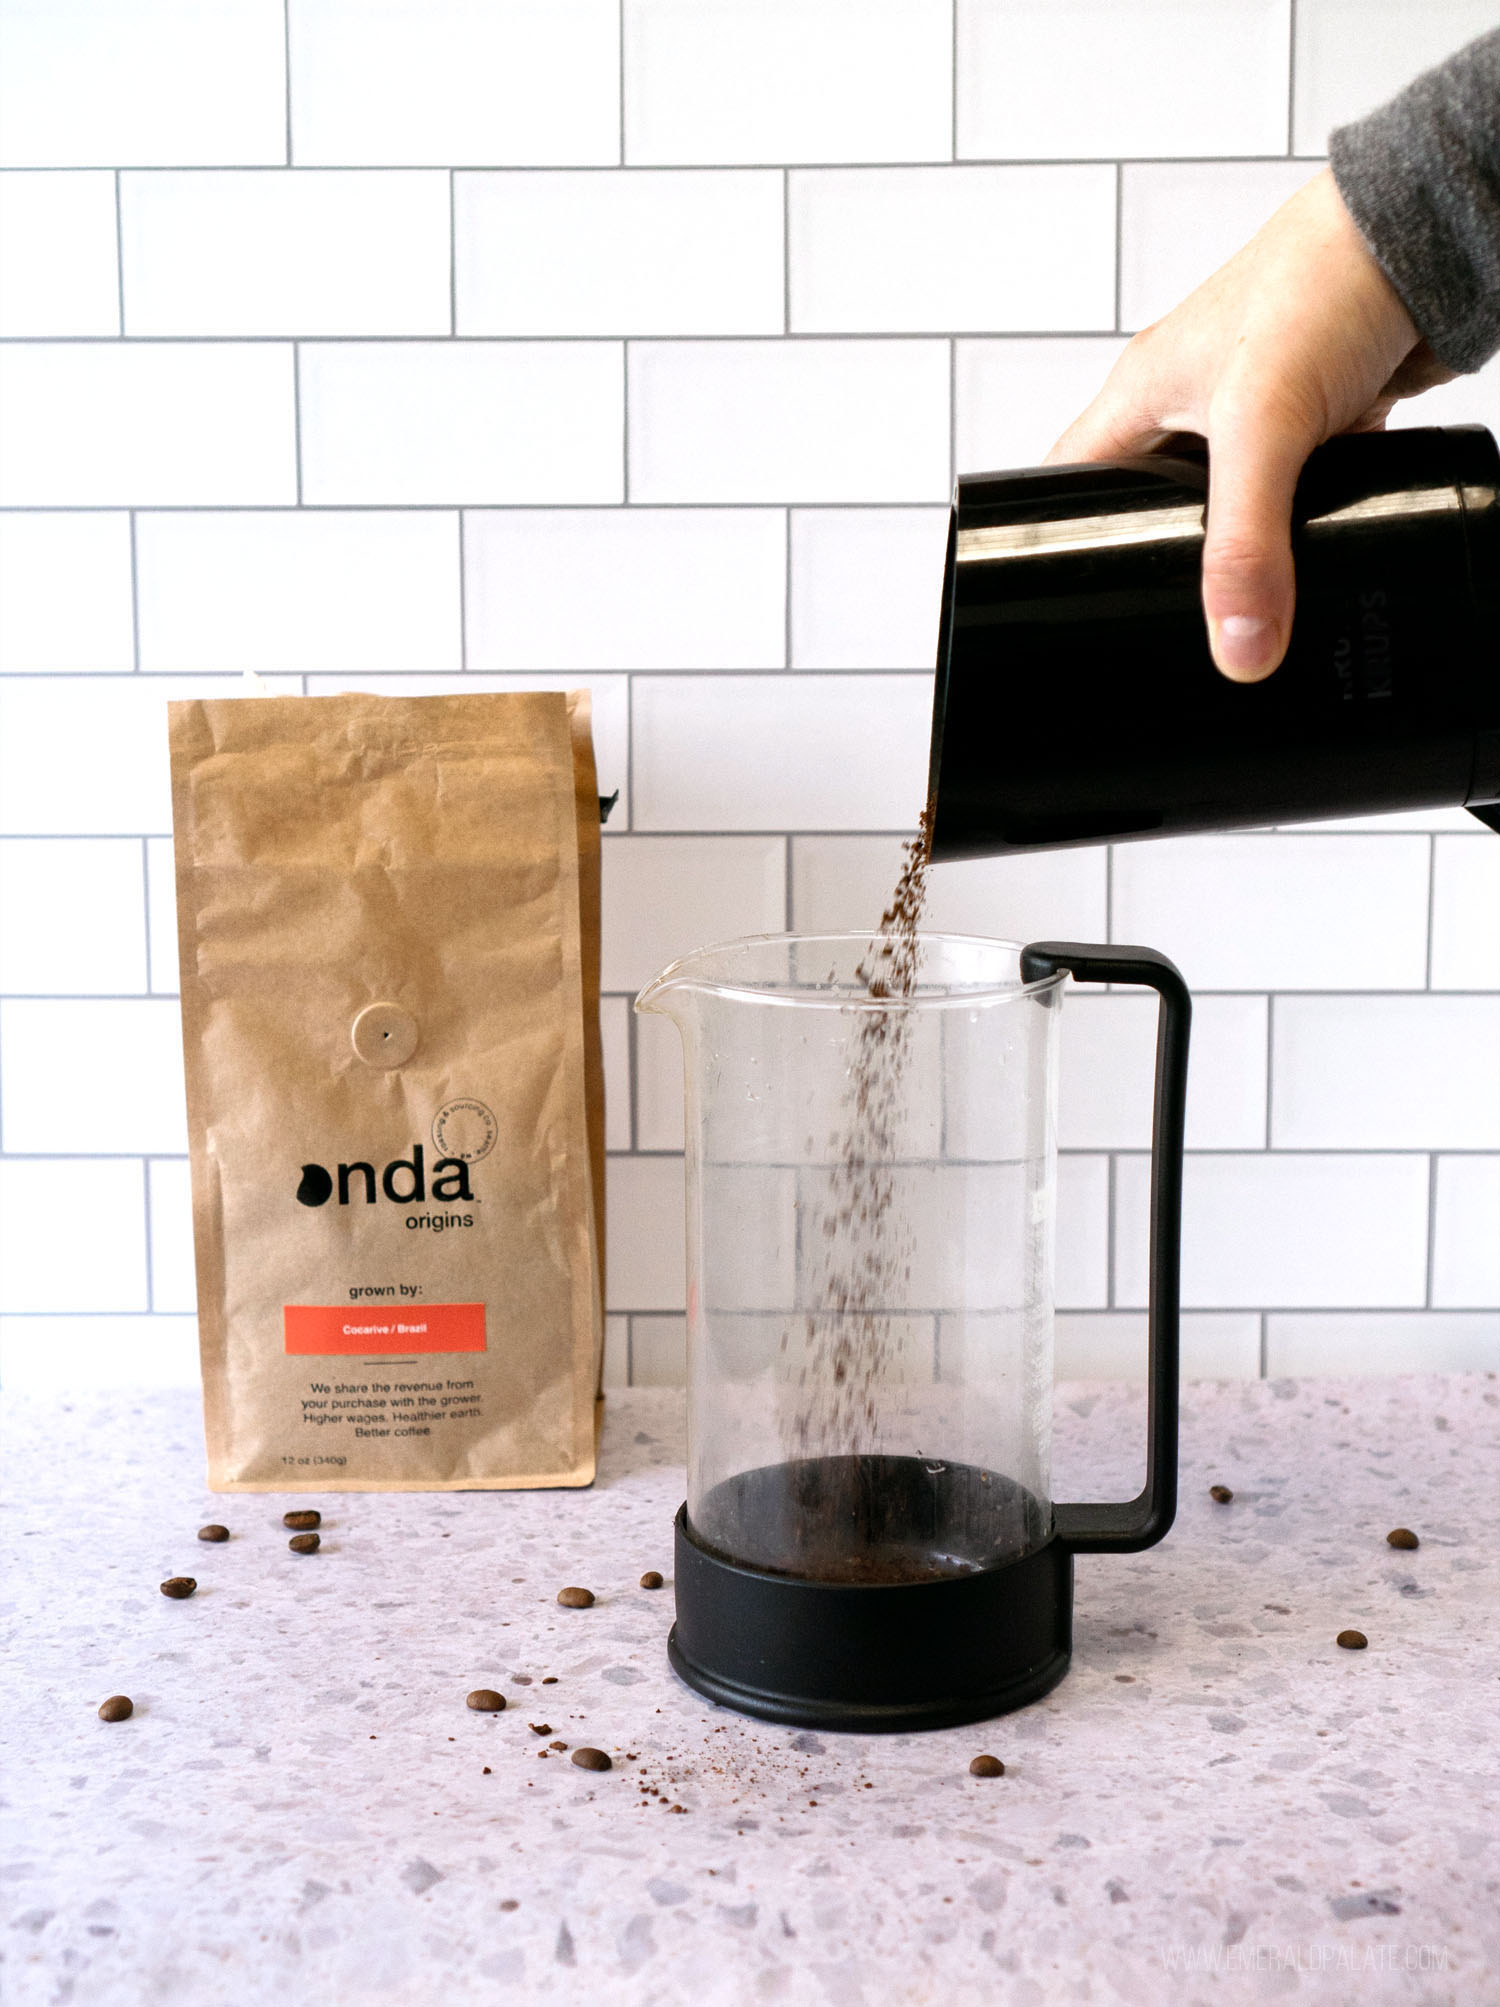 https://www.emeraldpalate.com/wp-content/uploads/2021/04/Best-Coffee-for-French-Press-pouring-grinds-lowres.jpg